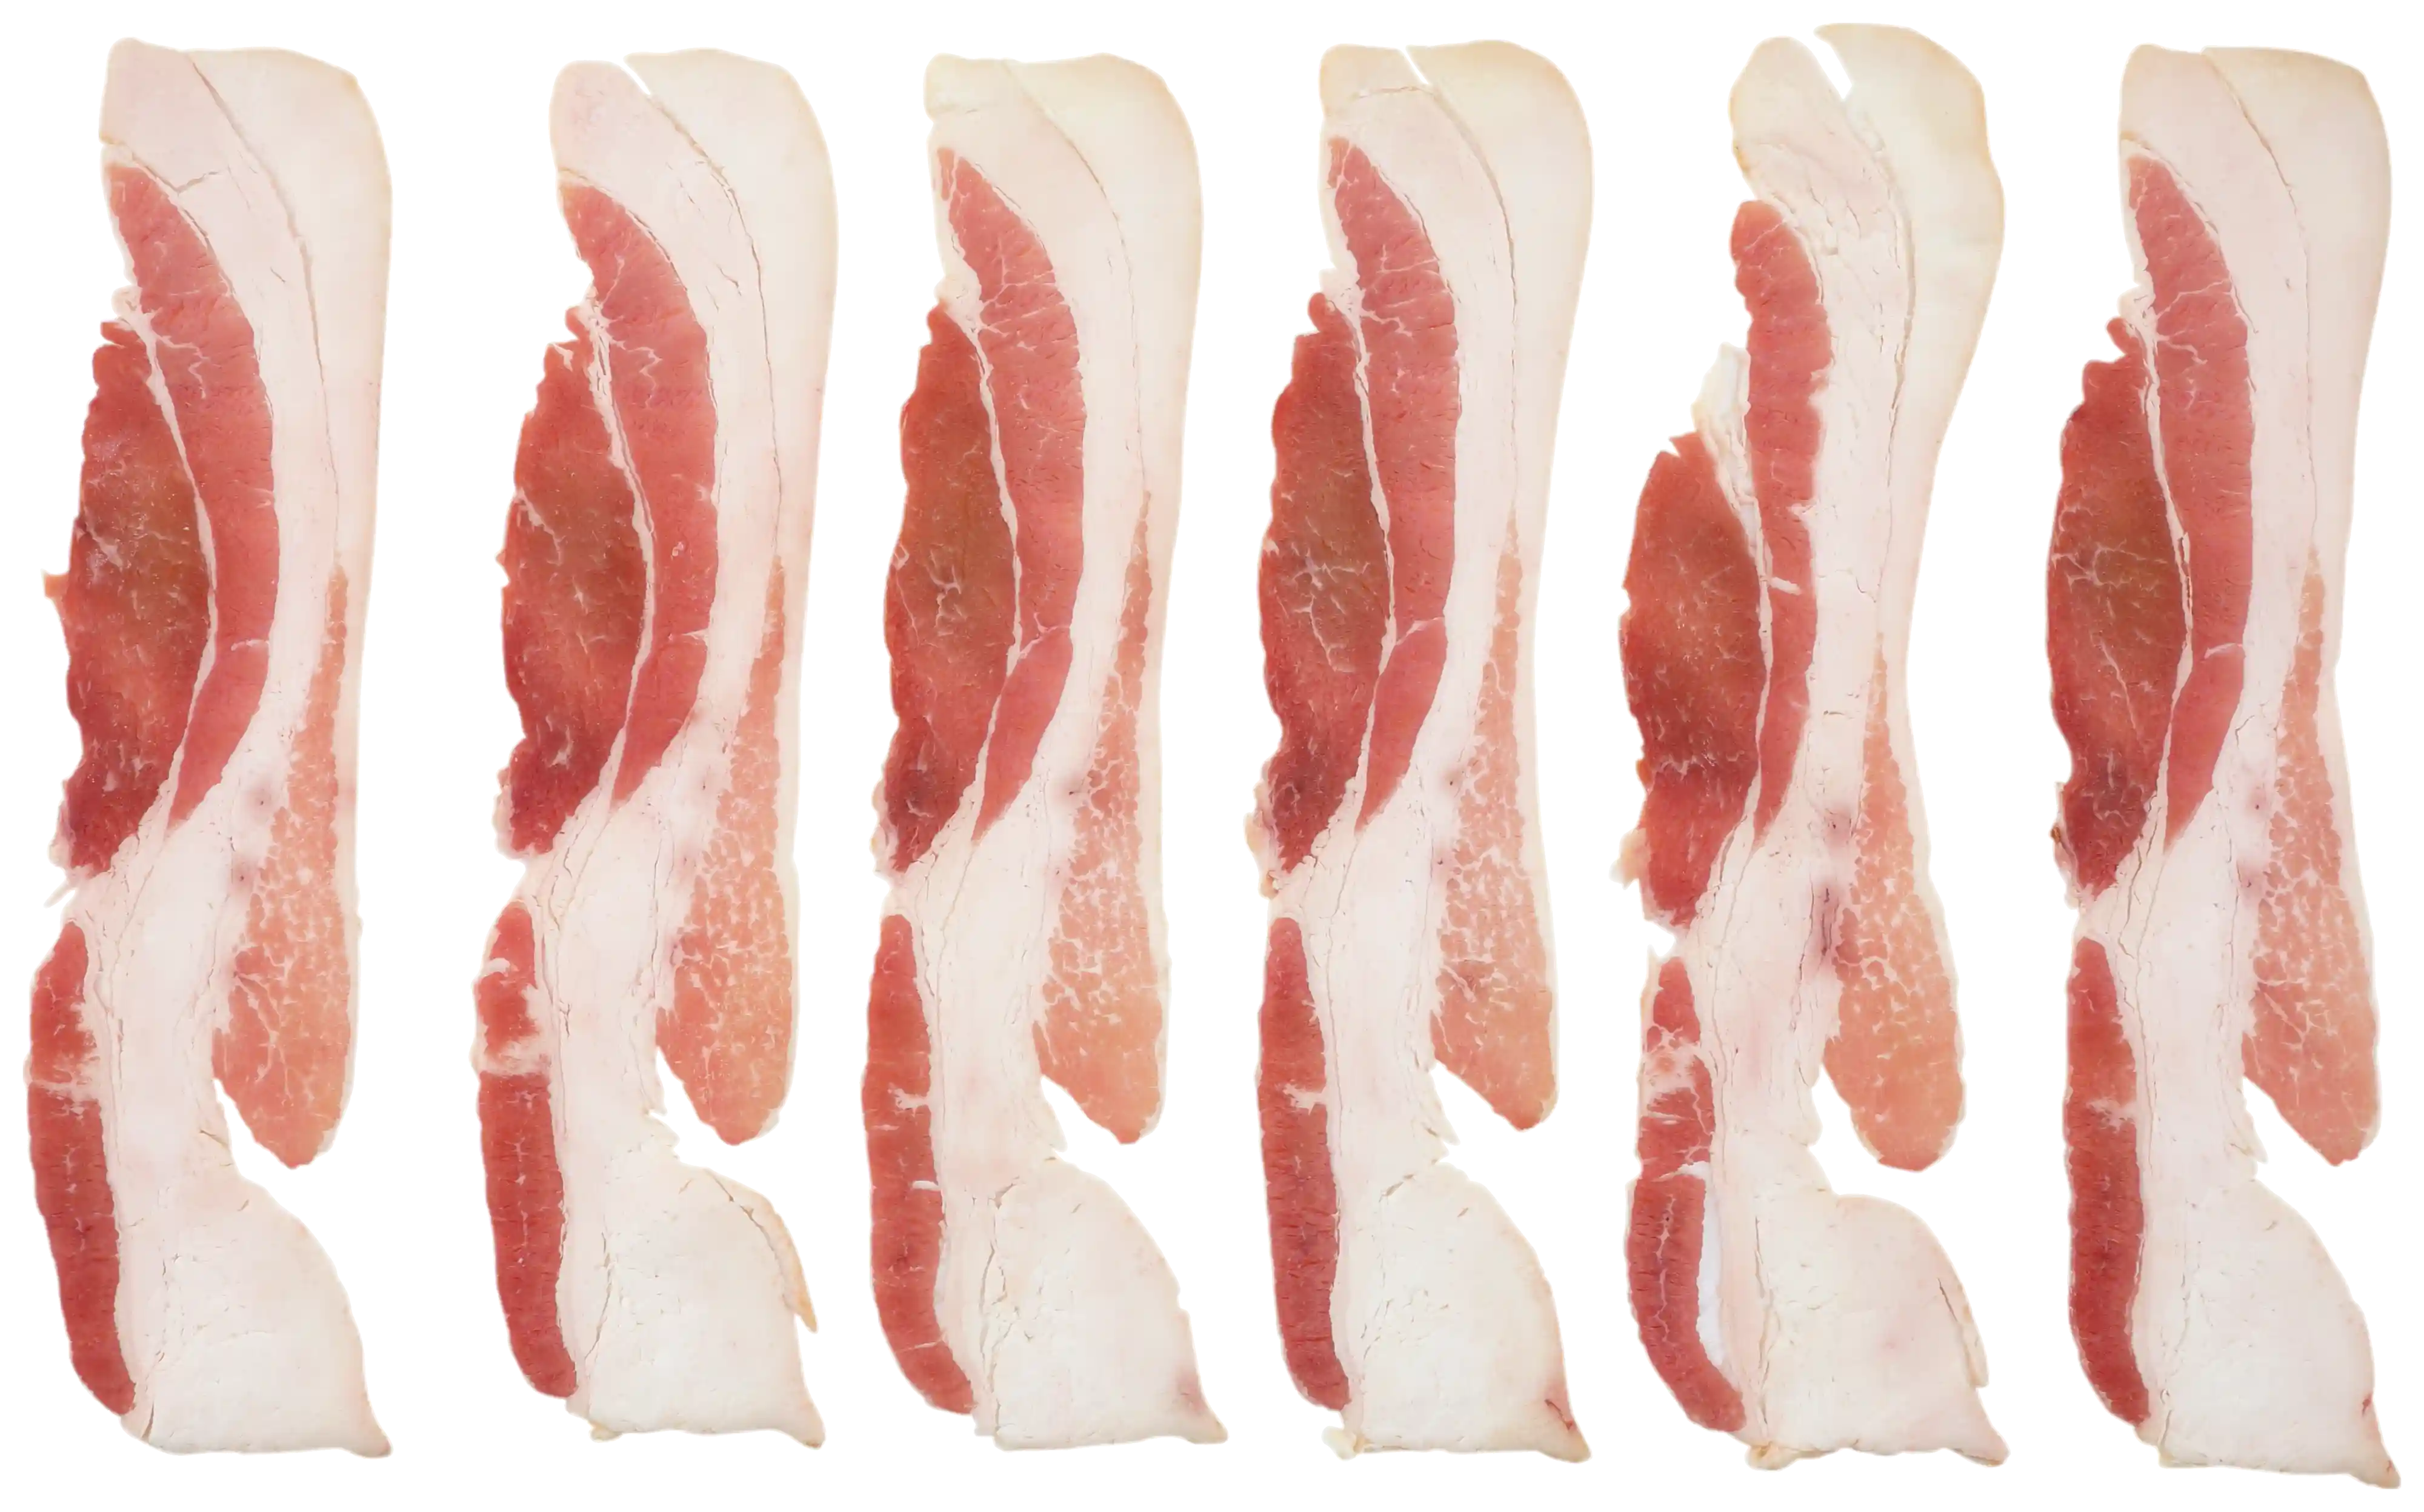 Wright® Brand Naturally Hickory Smoked Thin Sliced Bacon, Flat-Pack®, 15 Lbs, 18-22 Slices per Pound, Frozen_image_21